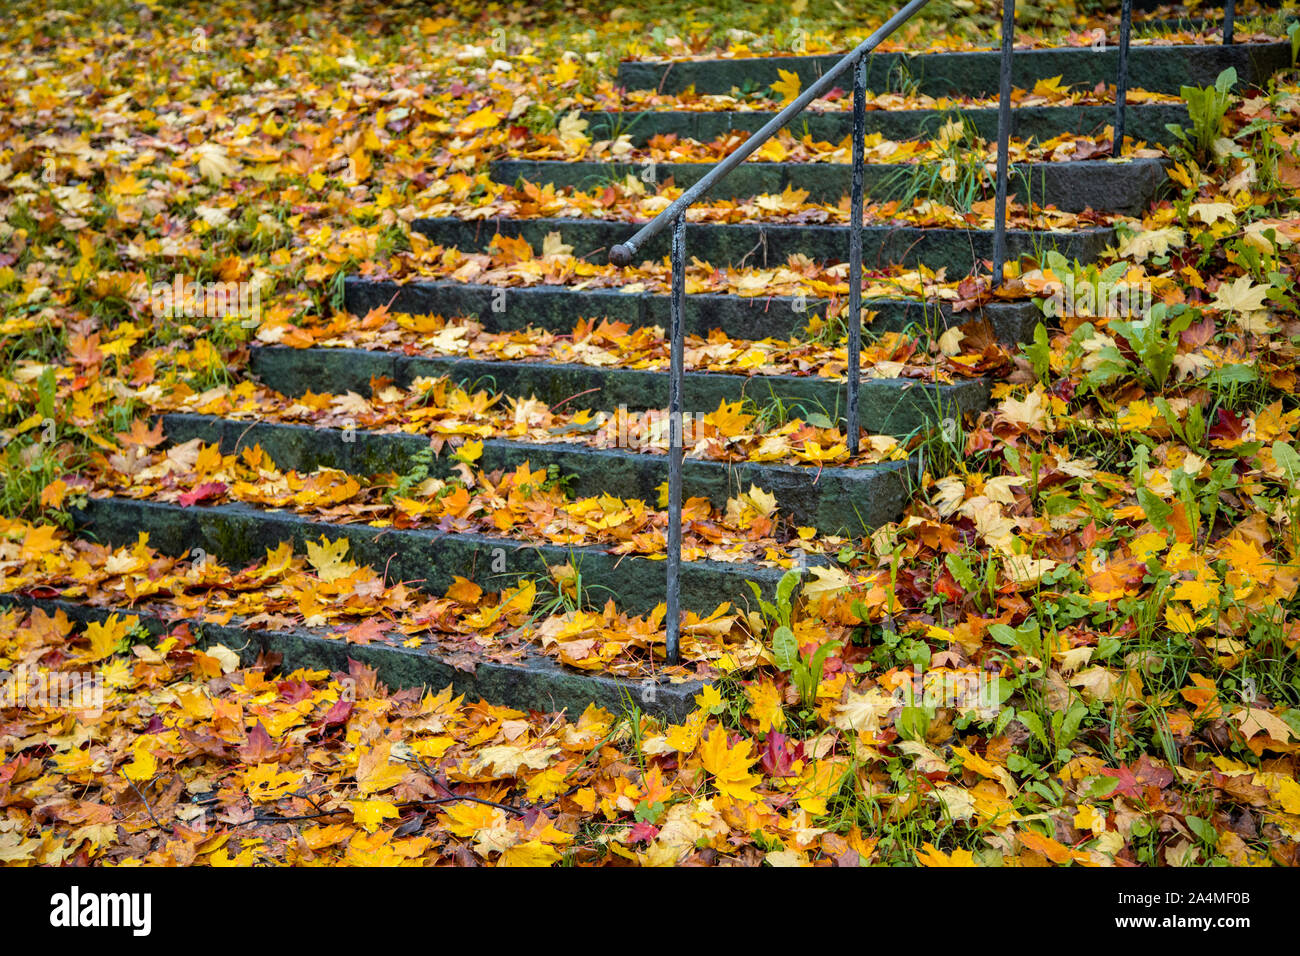 Autumn leaves on steps in park Stock Photo